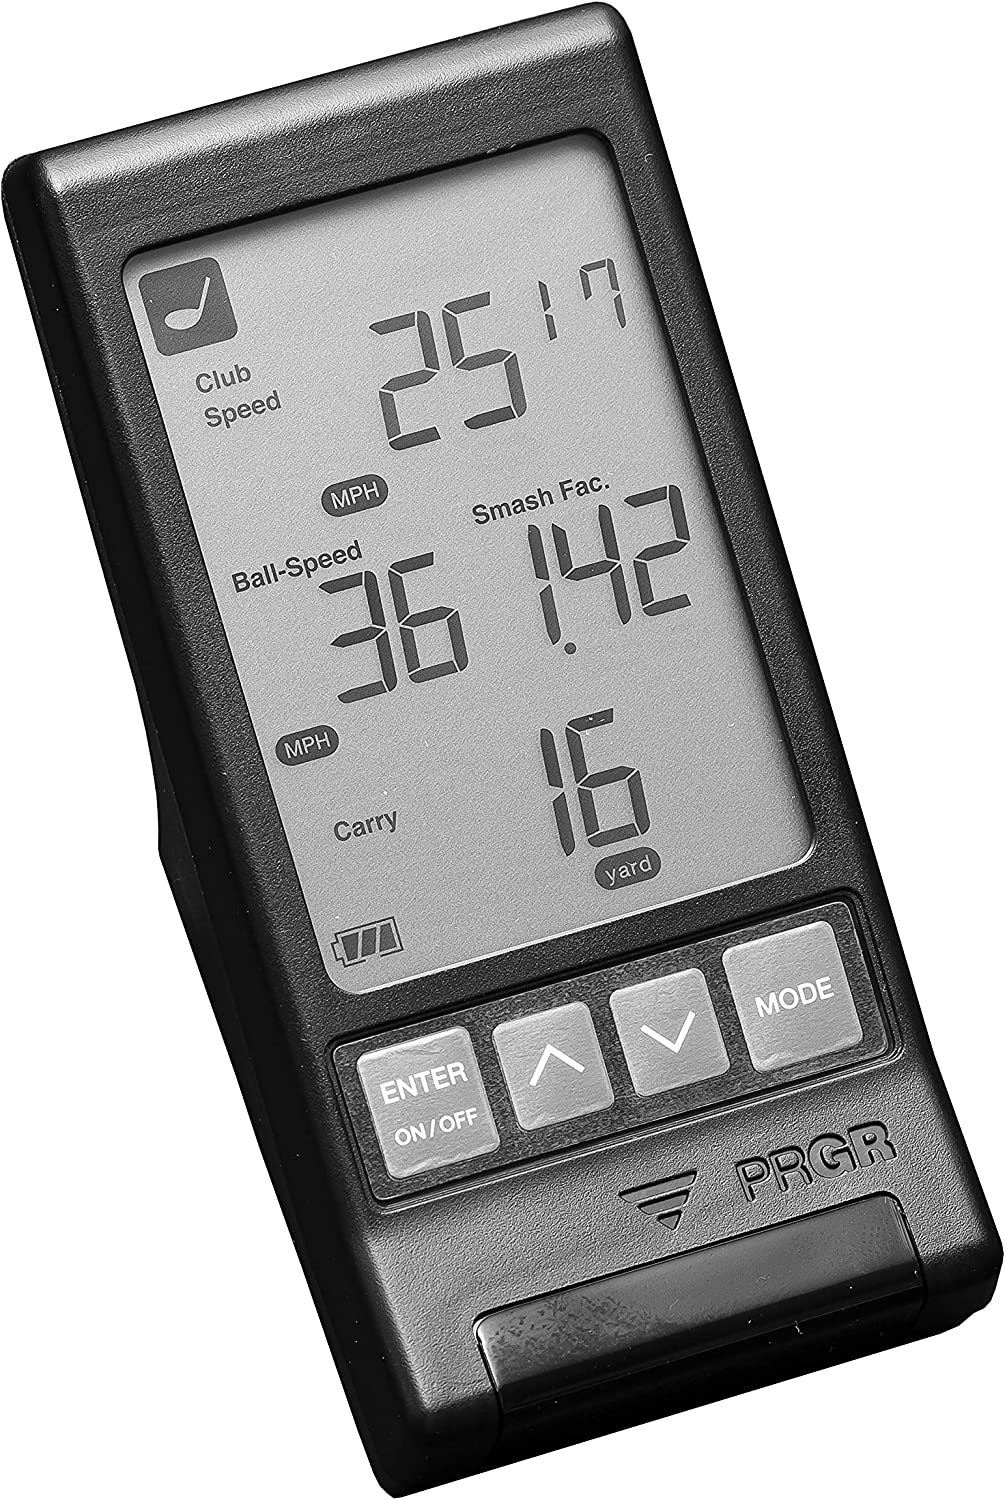 PRGR Black Pocket Launch Monitor HS-130A